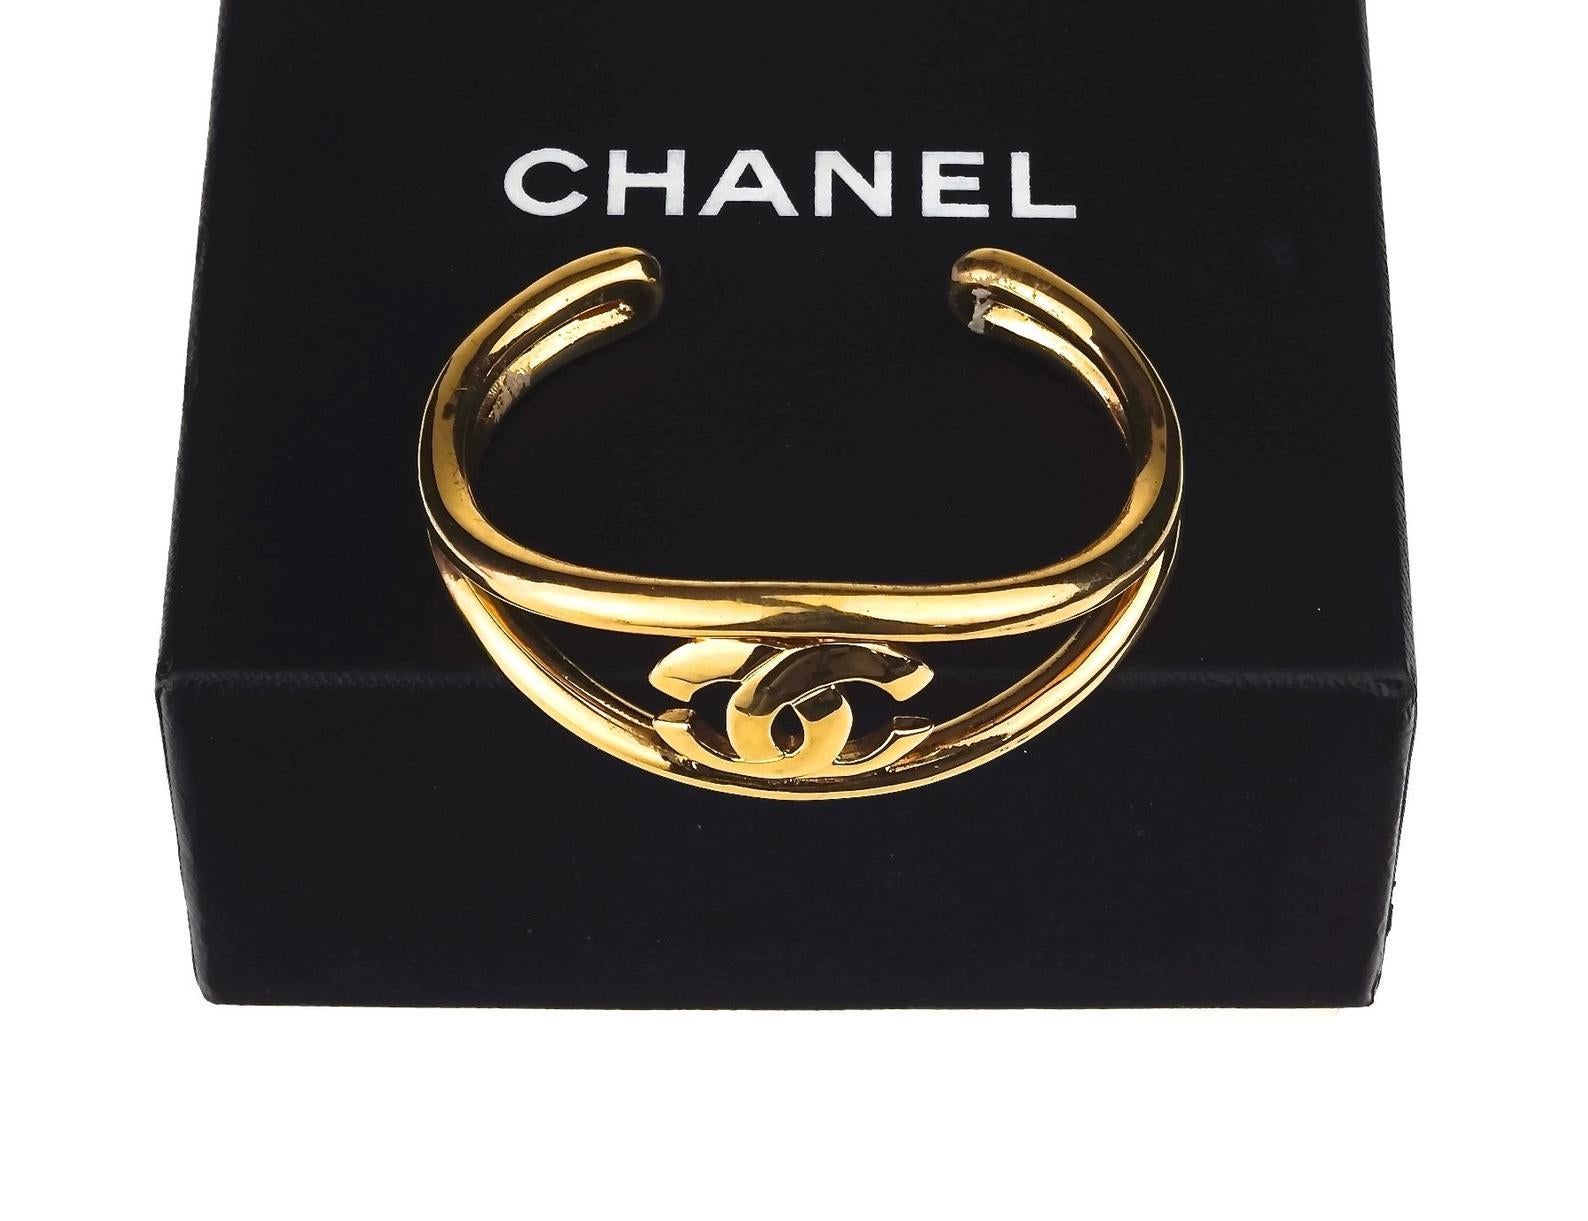 Vintage 1997 CHANEL CC Logo Cuff Bracelet

Measurements:
Height: 1.02 inches (2.6 cm)
Inner Circumference: 6.50 inches (16.5 cm)

Features:
- 100% Authentic CHANEL.
- Openwork CC logo at the centre.
- Signed CHANEL 97 CC P Made in France.
- Gold